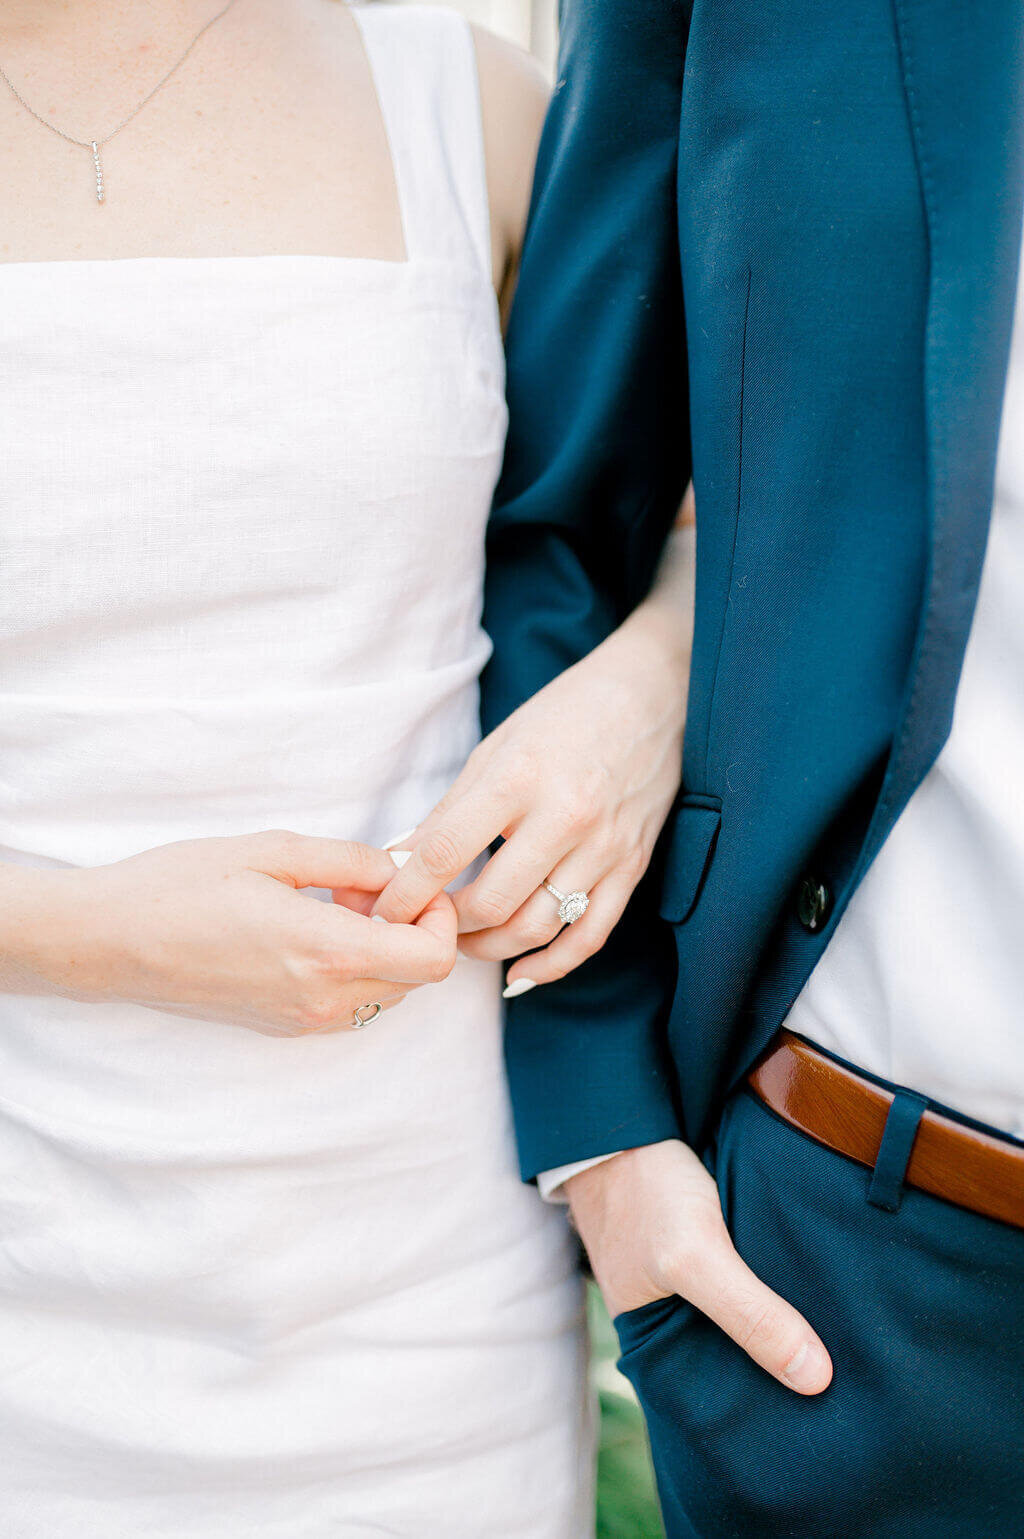 Simple image of a couple linking arms during their engagement shoot. Photo emphasizes an engagement ring